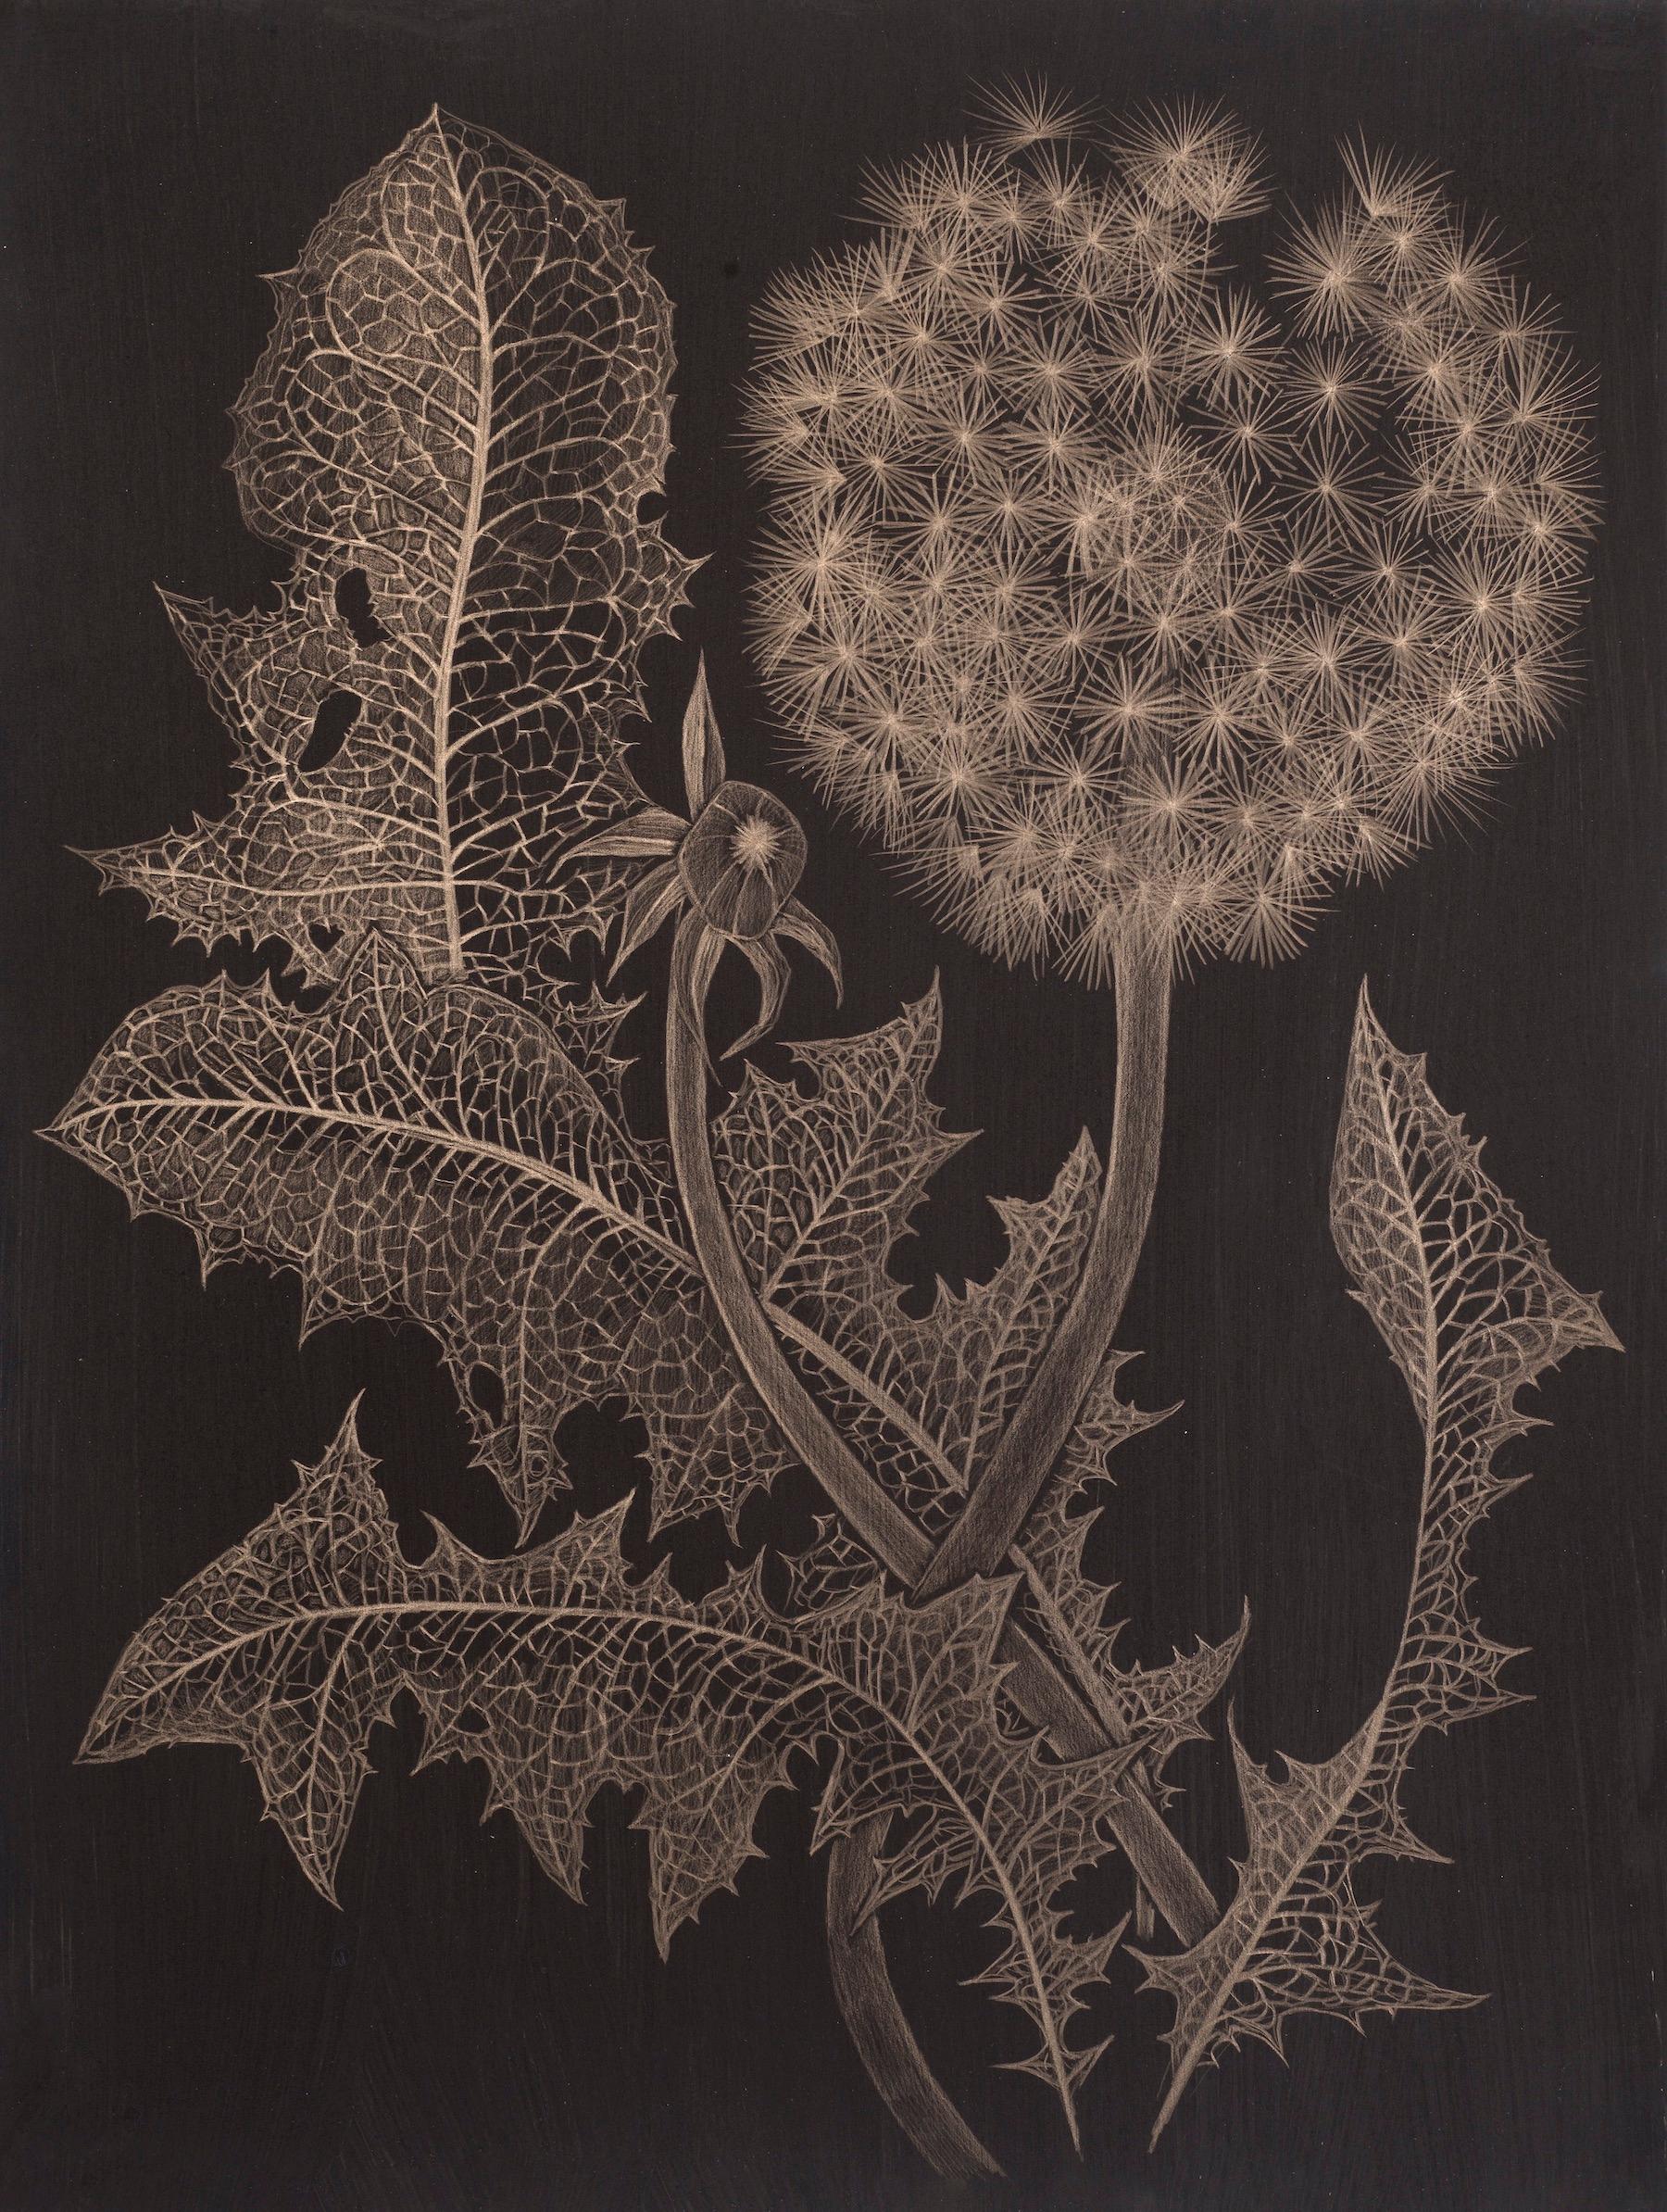 Margot Glass Landscape Art - Dandelion with Bud Two, Botanical Drawing on Black Paper made with 14K Gold